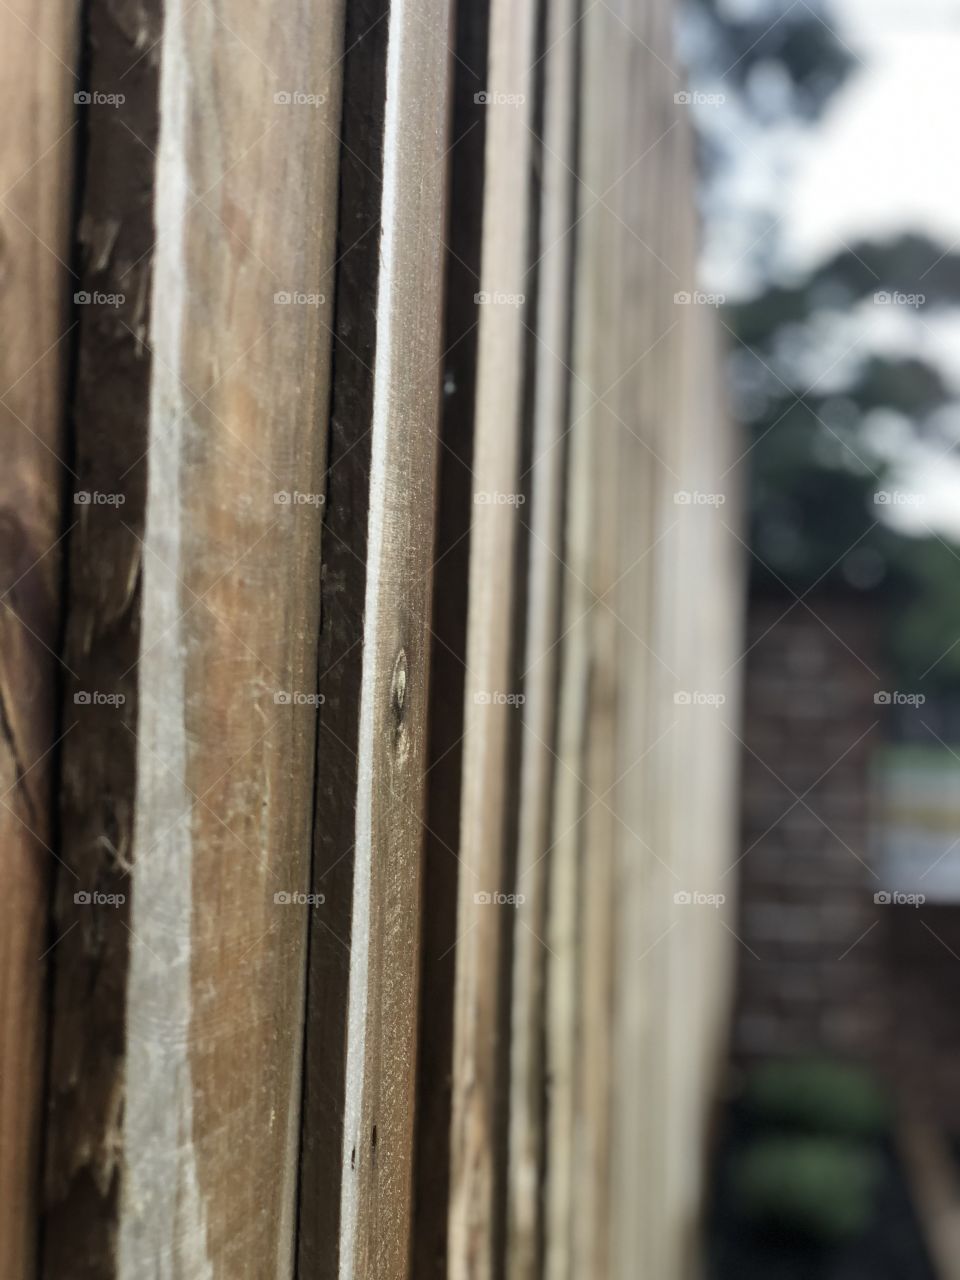 The detail in this wooden fence is clearly shown as well as the rough texture. The background is blurred to further bring the attention back to the wooden fence.